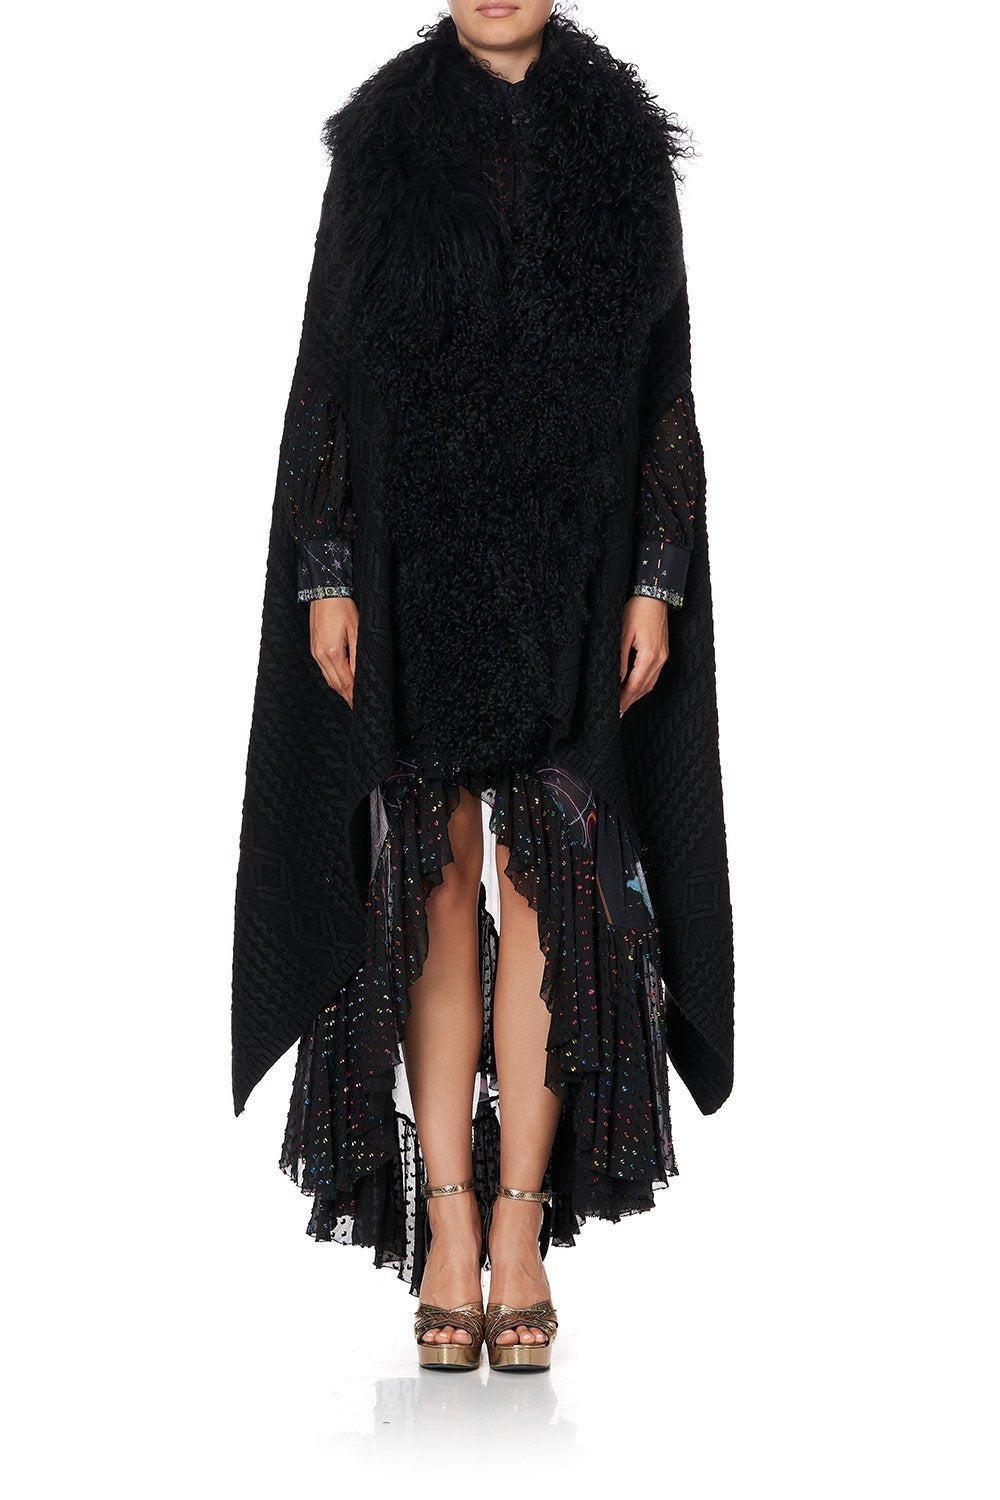 SHEARLING CAPE MIDNIGHT MOON HOUSE